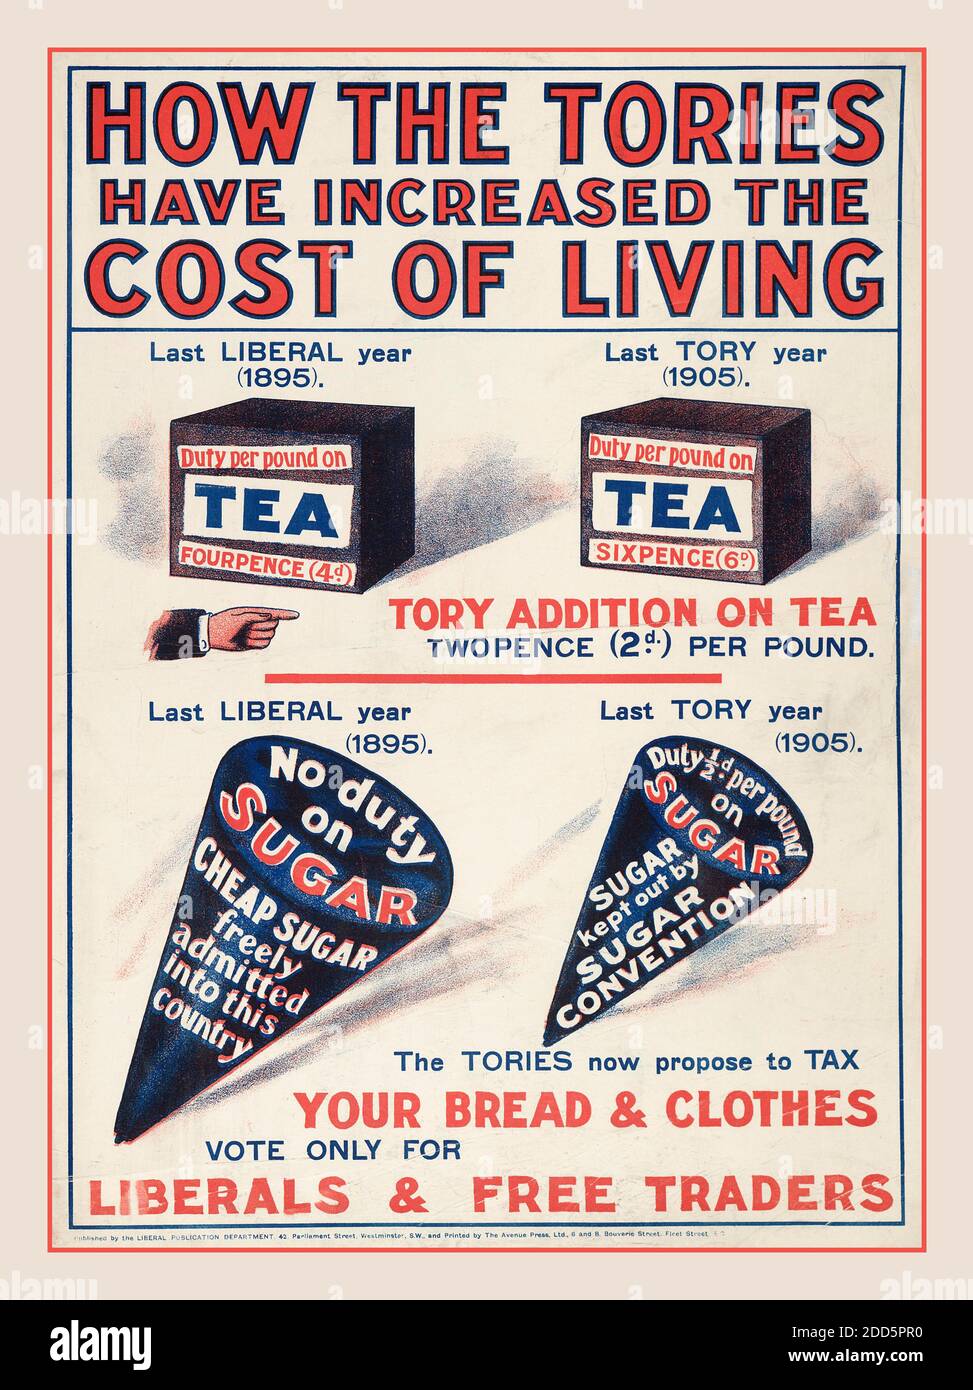 Vintage 1900's political propaganda poster UK 'HOW THE TORIES HAVE INCREASED THE COST OF LIVING' Blue and red ink on white paper, illustrating the increase in the tax price of tea and sugar under a Tory government (Tory government of 1905 compared to Liberal government of 1895), produced for the Liberal Party. Printer: Avenue Press London Date: c1905-c1910 Stock Photo